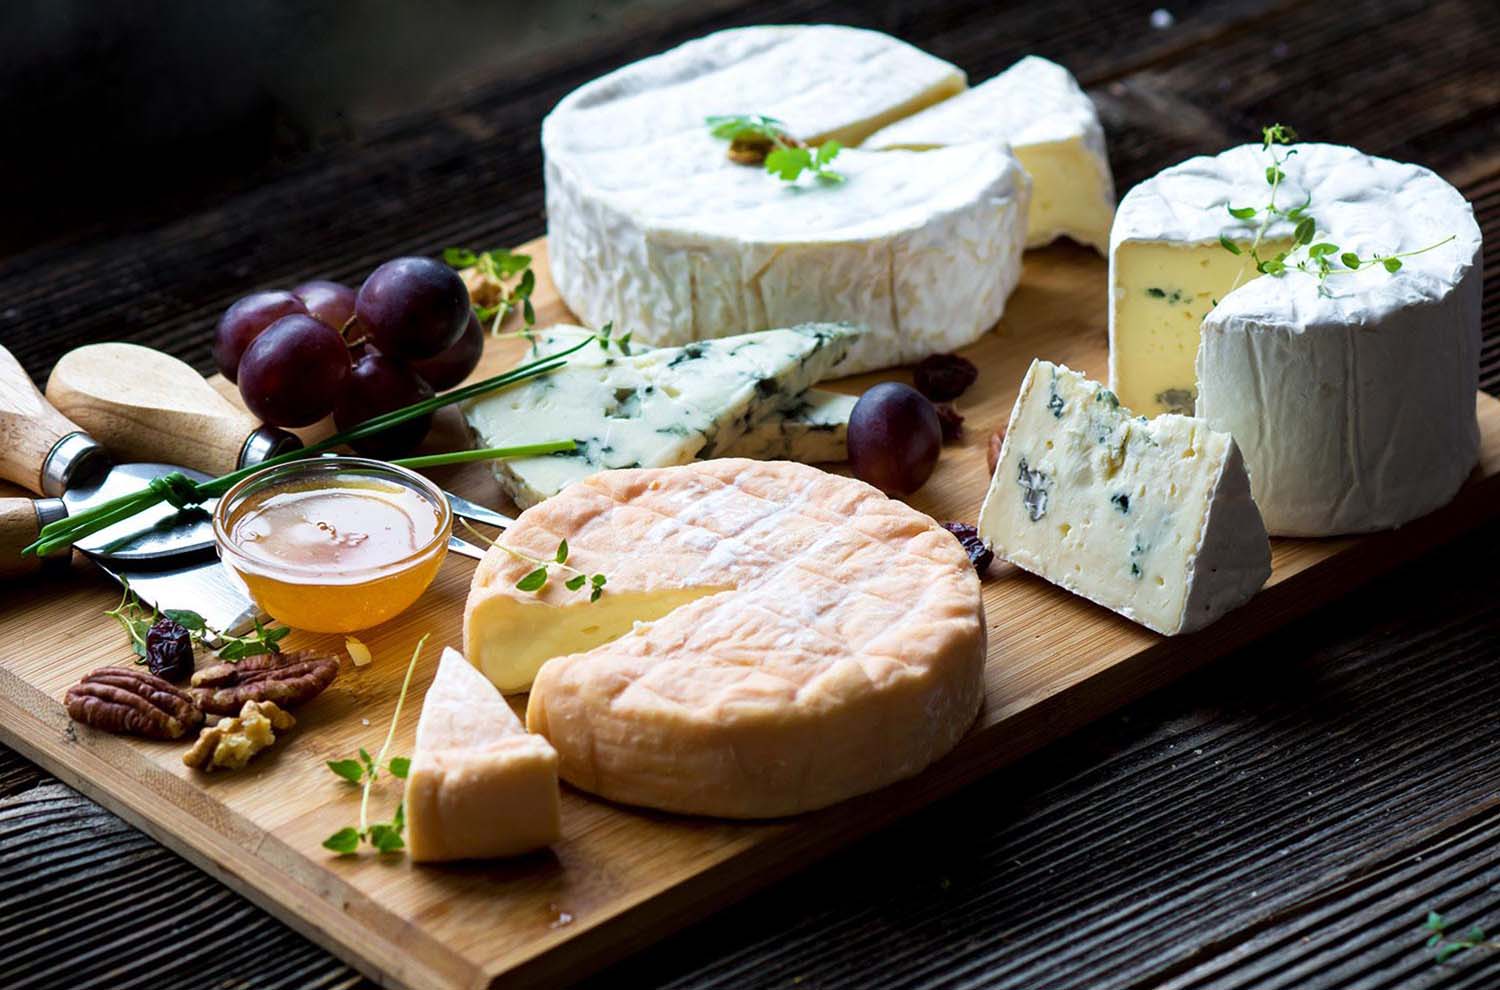 Tips to compose the perfect cheese plate for your next wine party